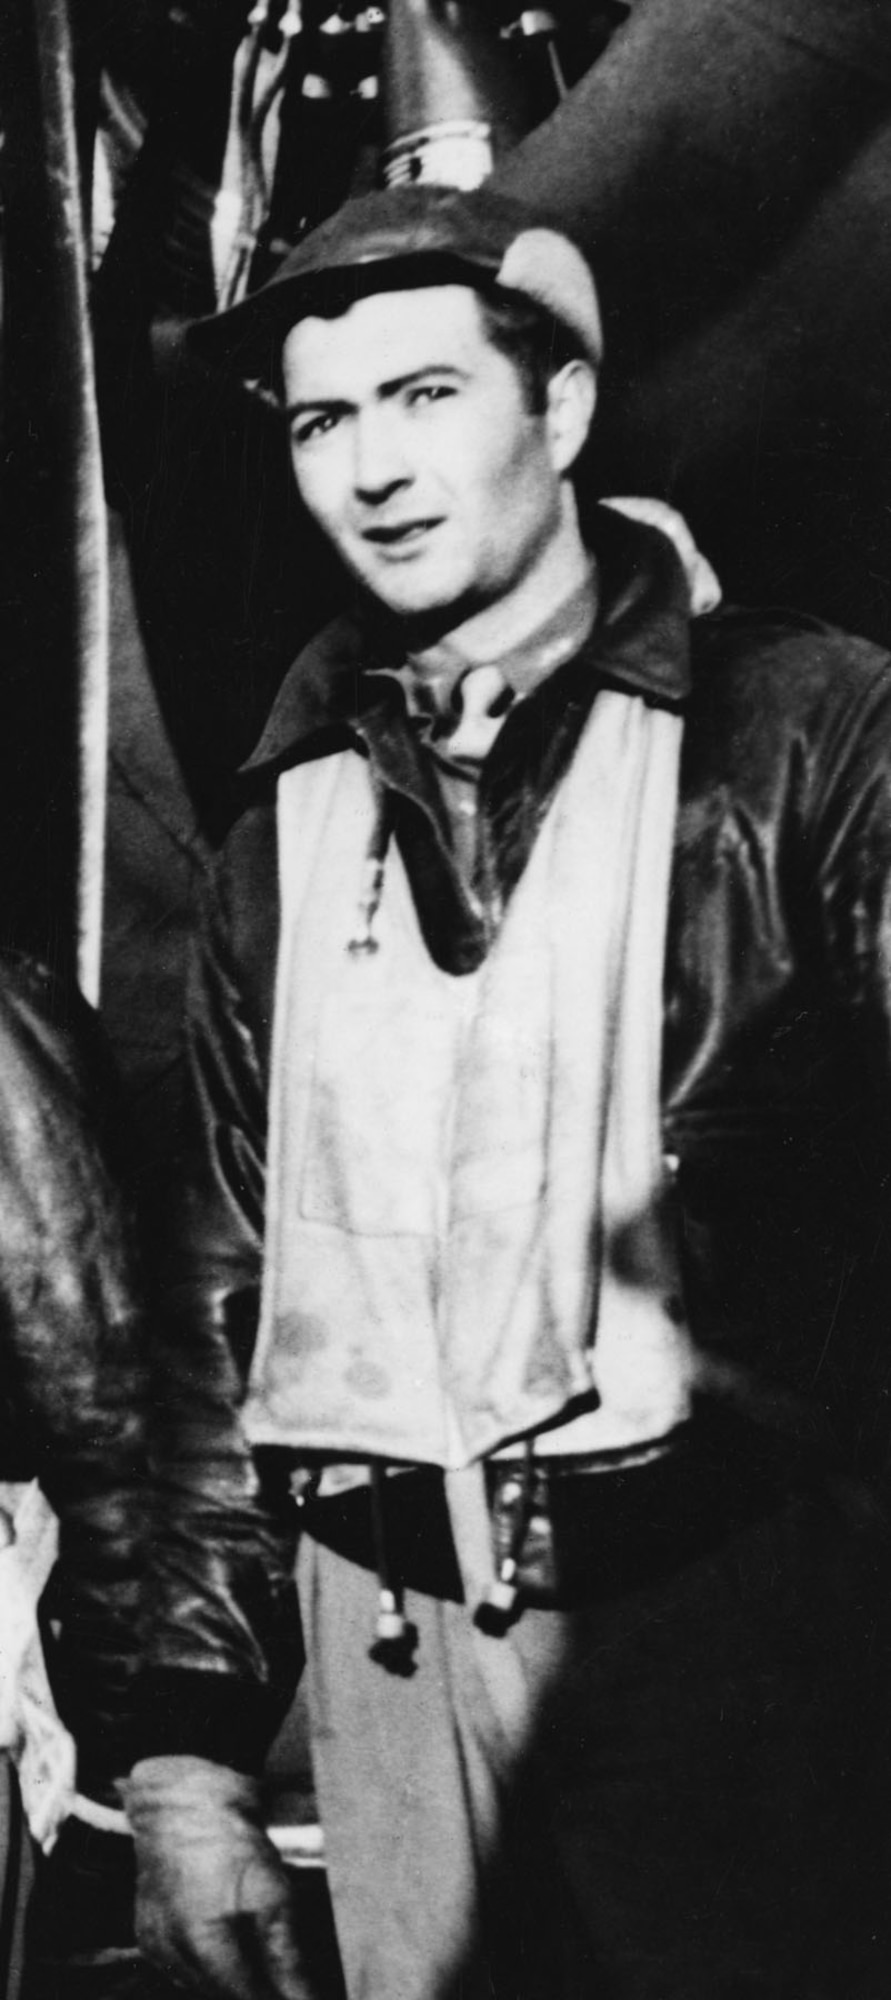 DAYTON, Ohio - Mathis in his flight gear in England. (U.S. Air Force photo)